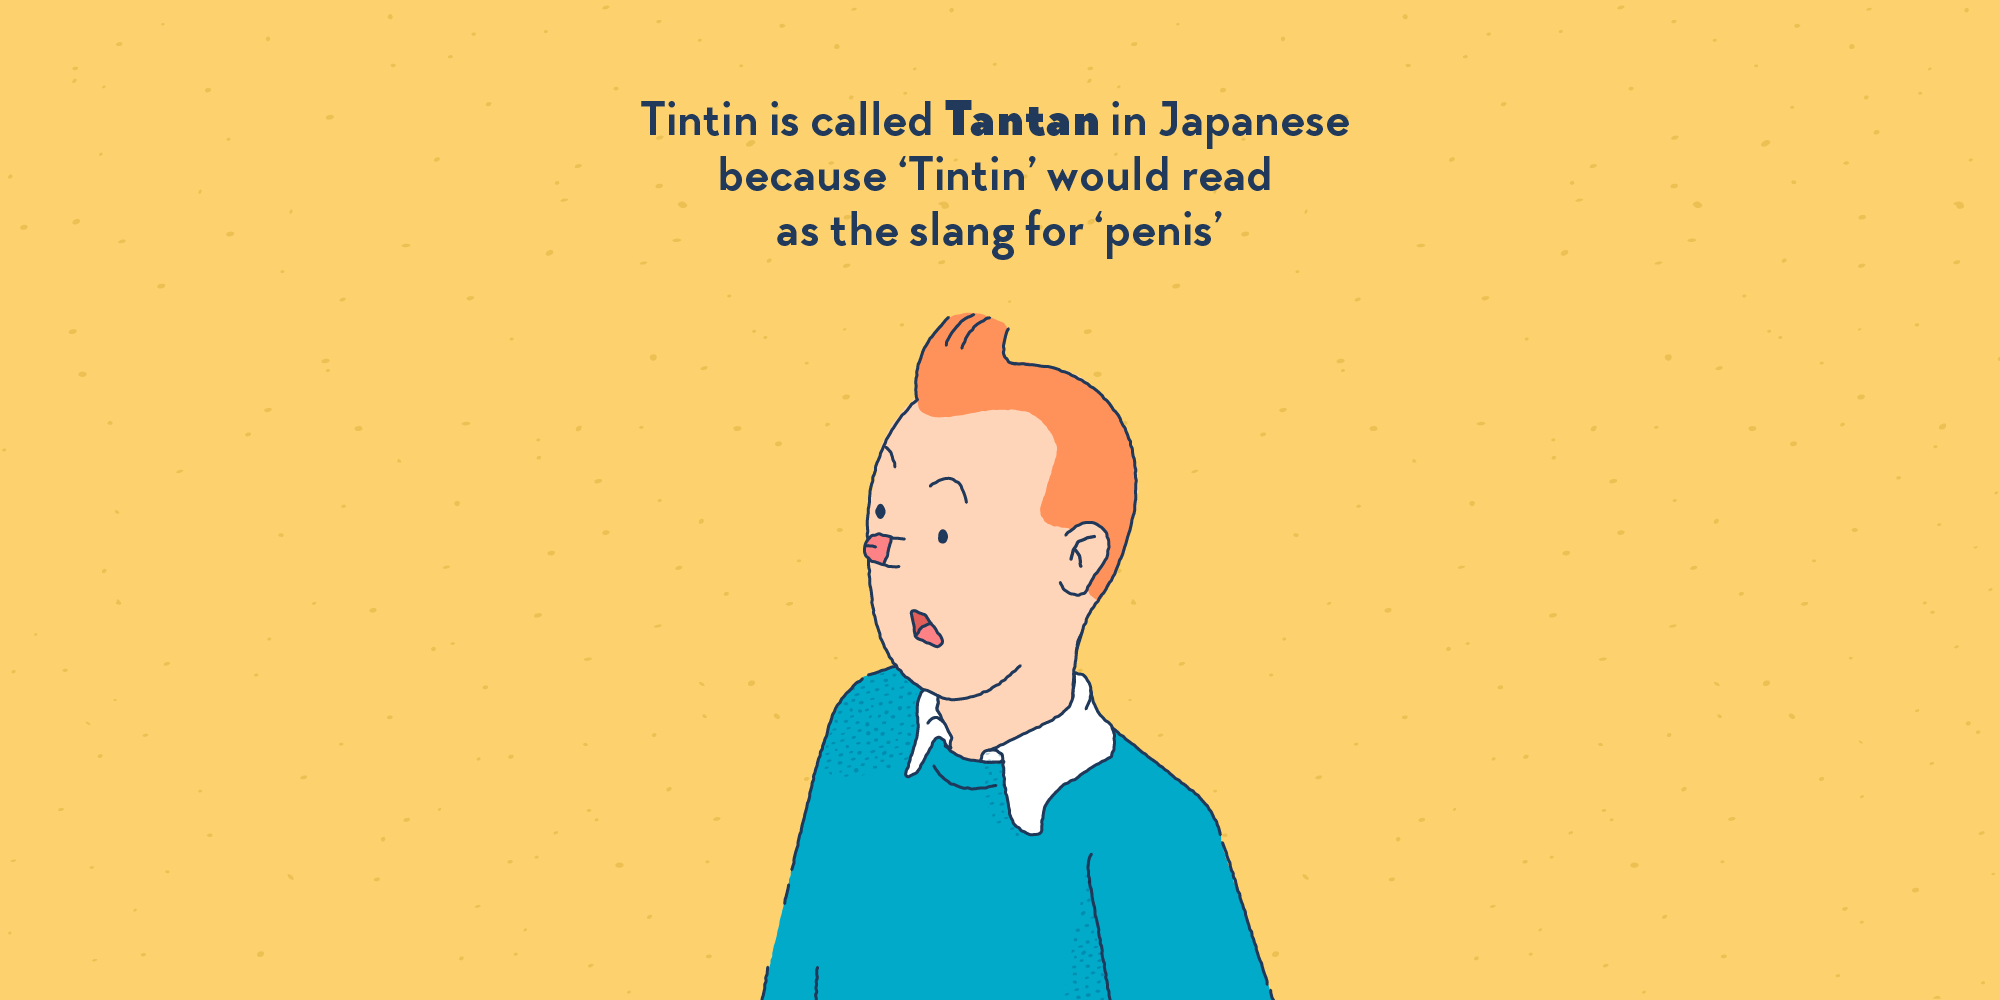 A portrait of the character of Tintin, his noise replaced by a penis.